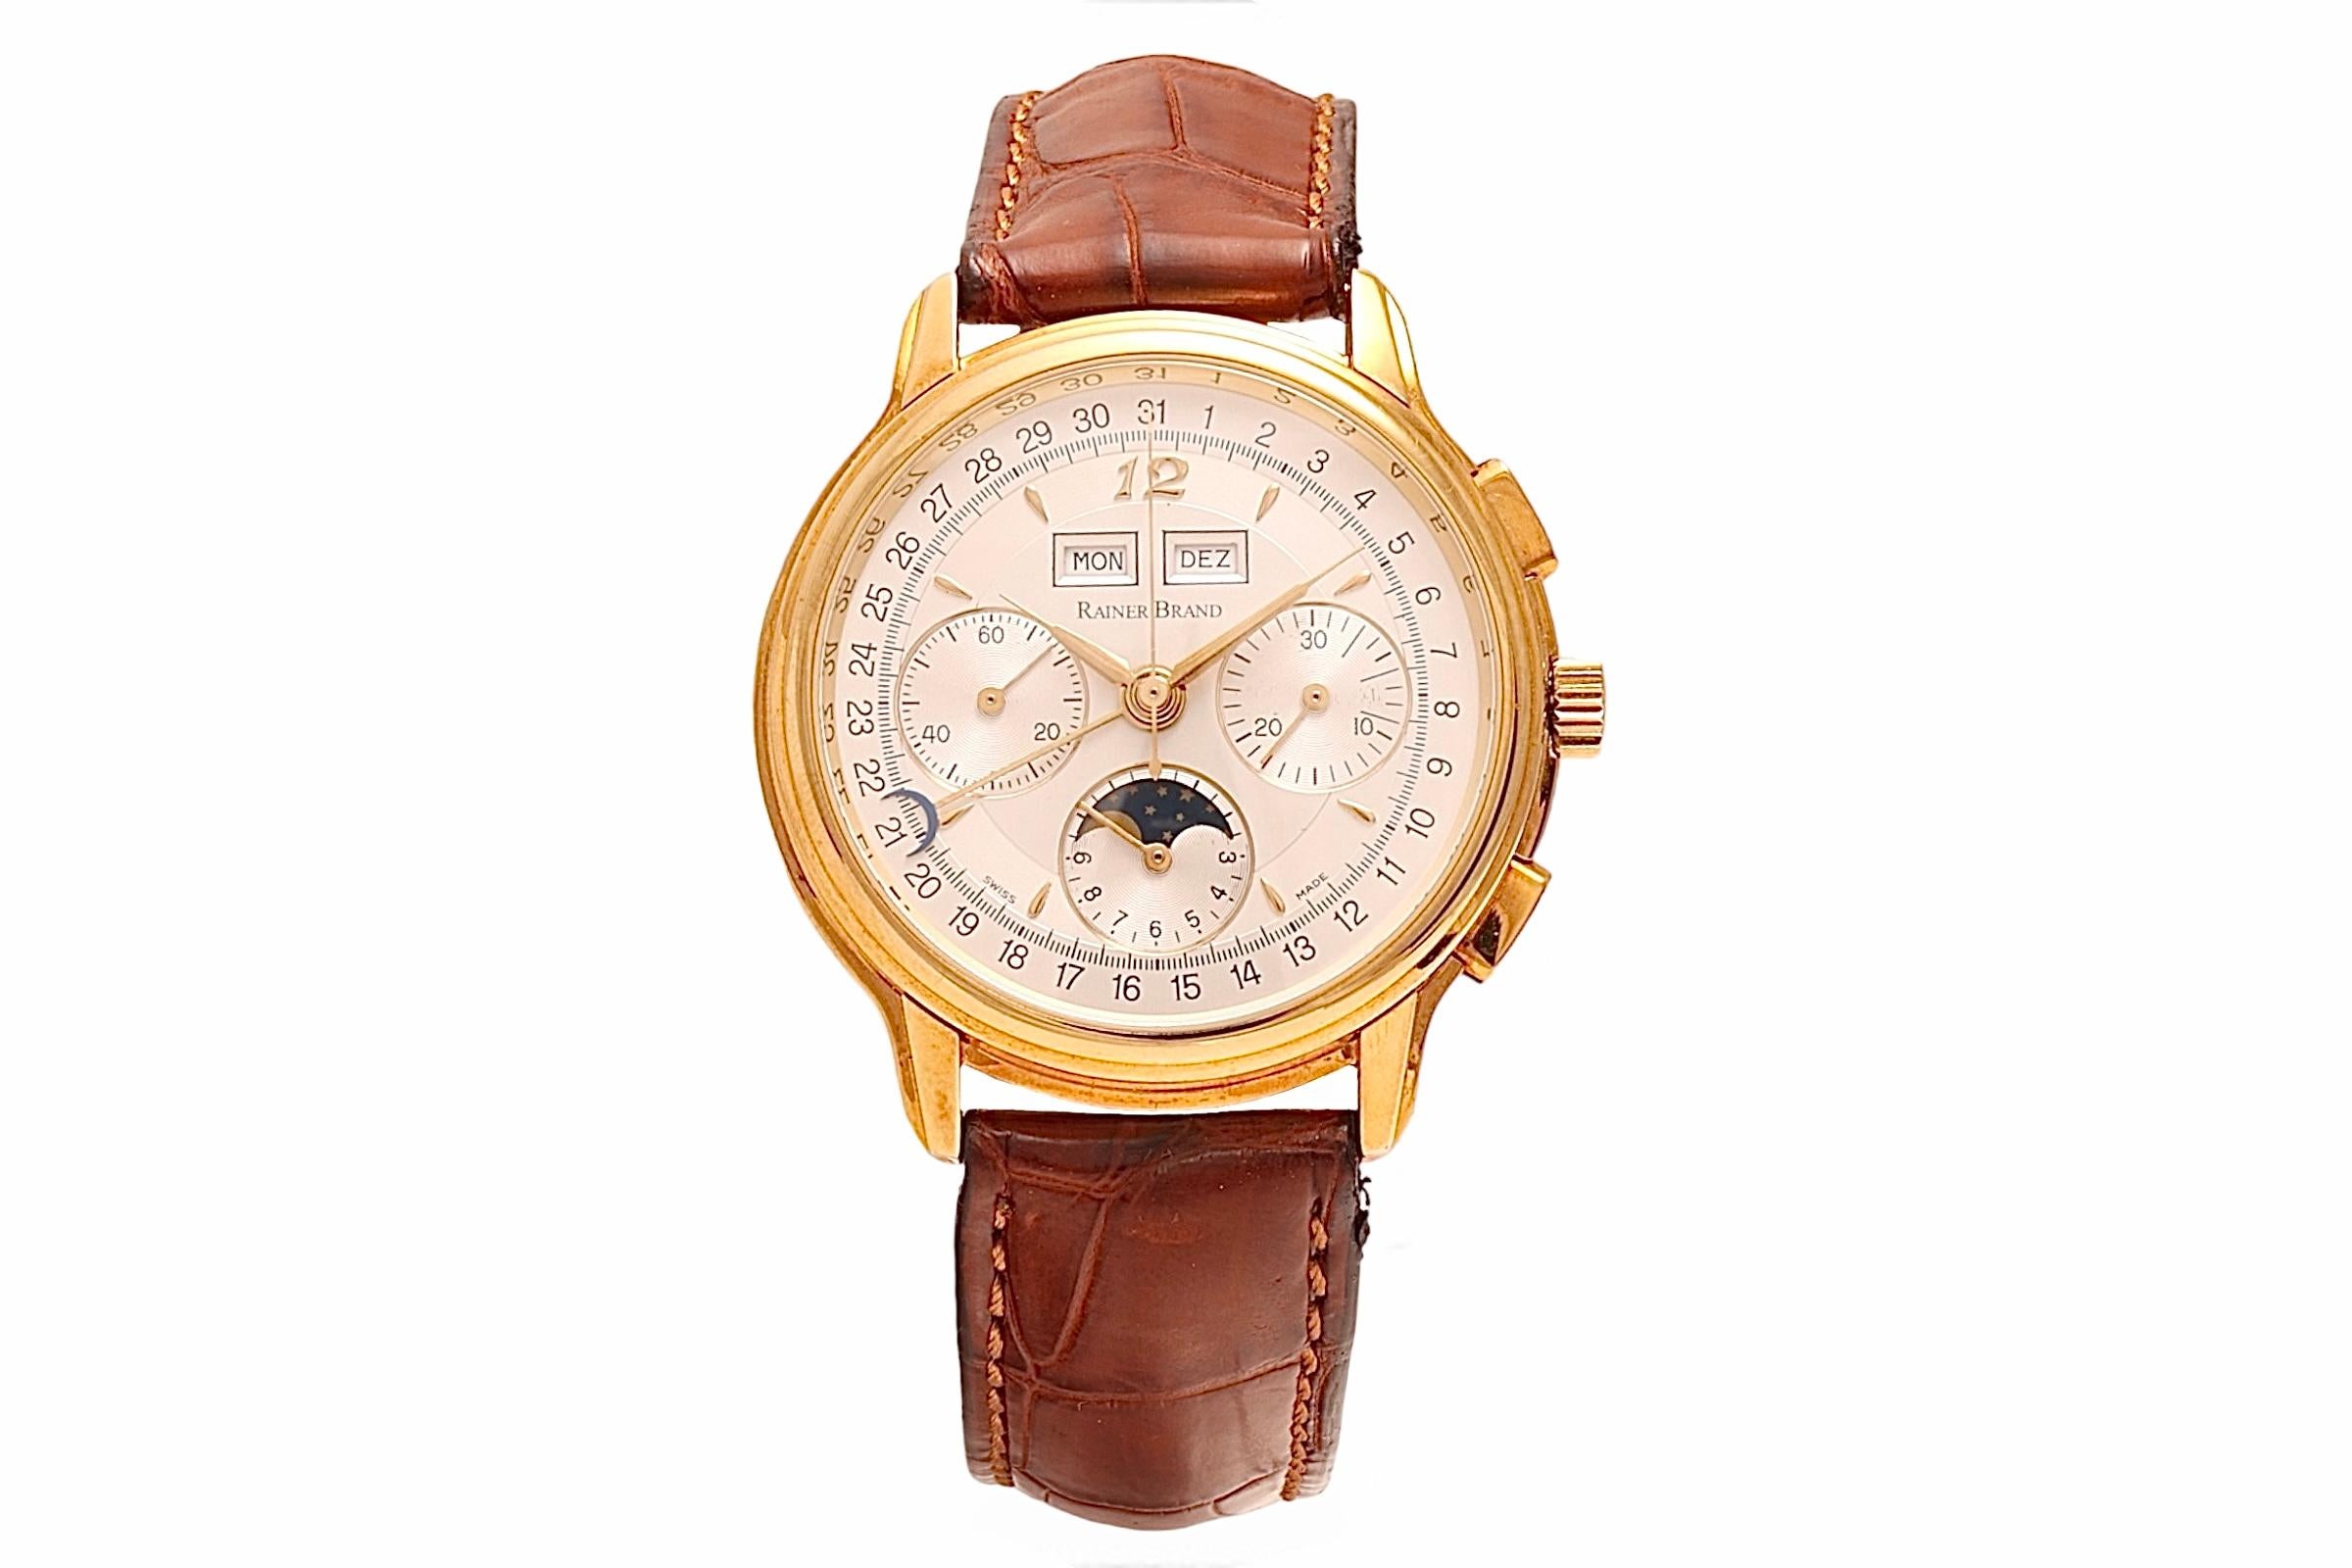 18 Kt Rainer Brand Triple Date Moonphase Chronograph Wrist Watch, Brand New In Box With all Warranty Papers, Rare Collectors Watch

Case : 18 Kt Solid Gold, Diameter 39.5 mm

Strap : To fit wrist of Max length 20 cm

“Let us render time a worthy